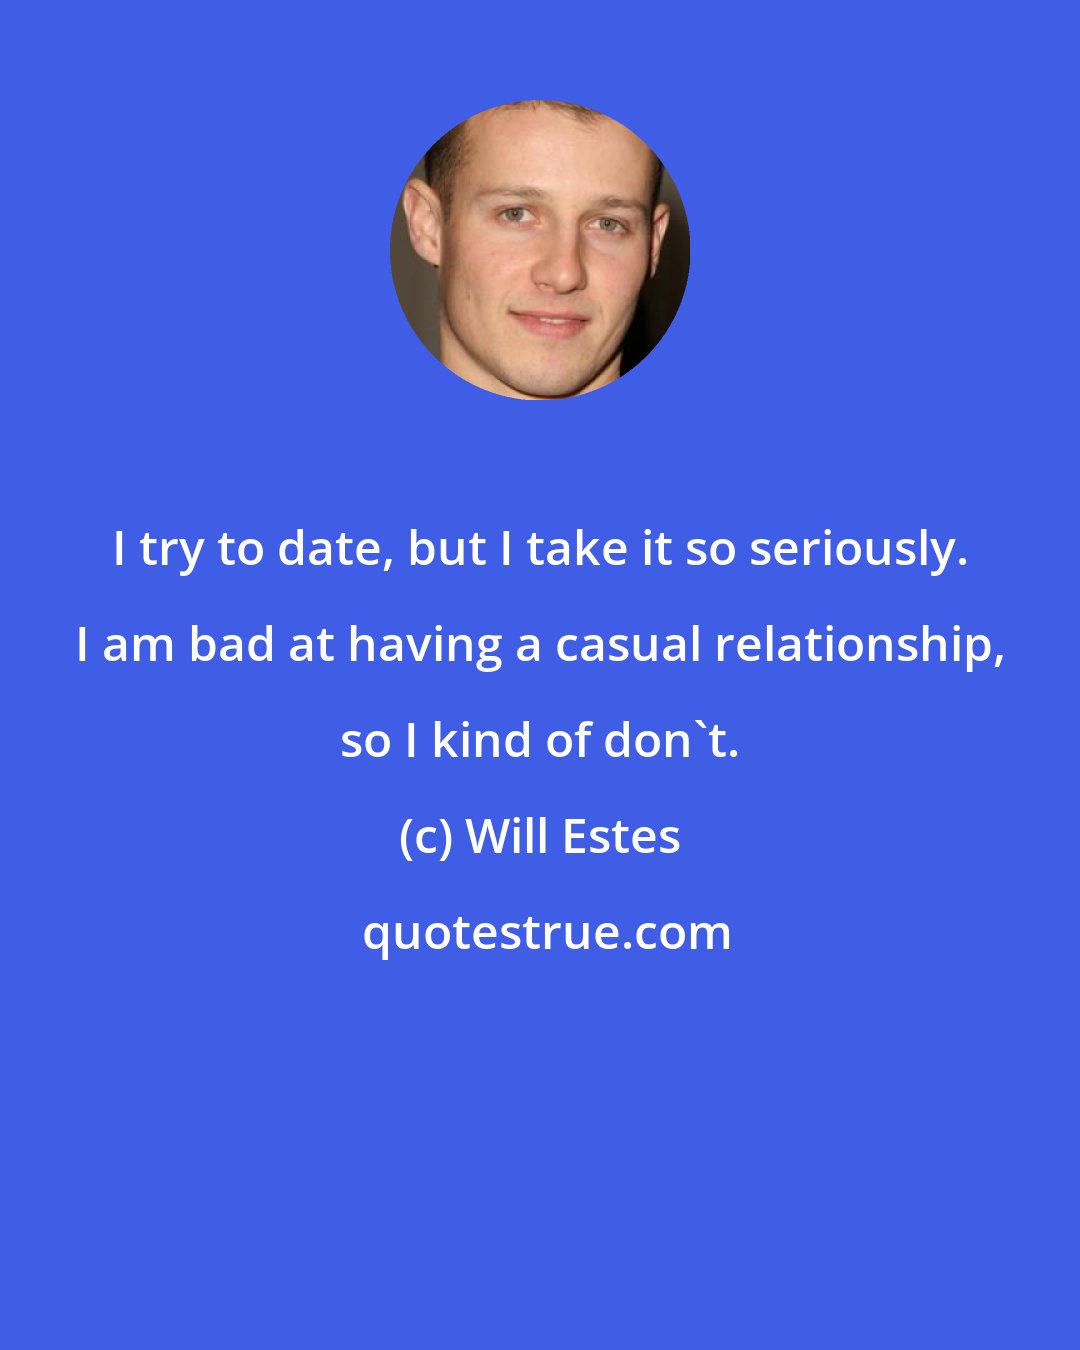 Will Estes: I try to date, but I take it so seriously. I am bad at having a casual relationship, so I kind of don't.